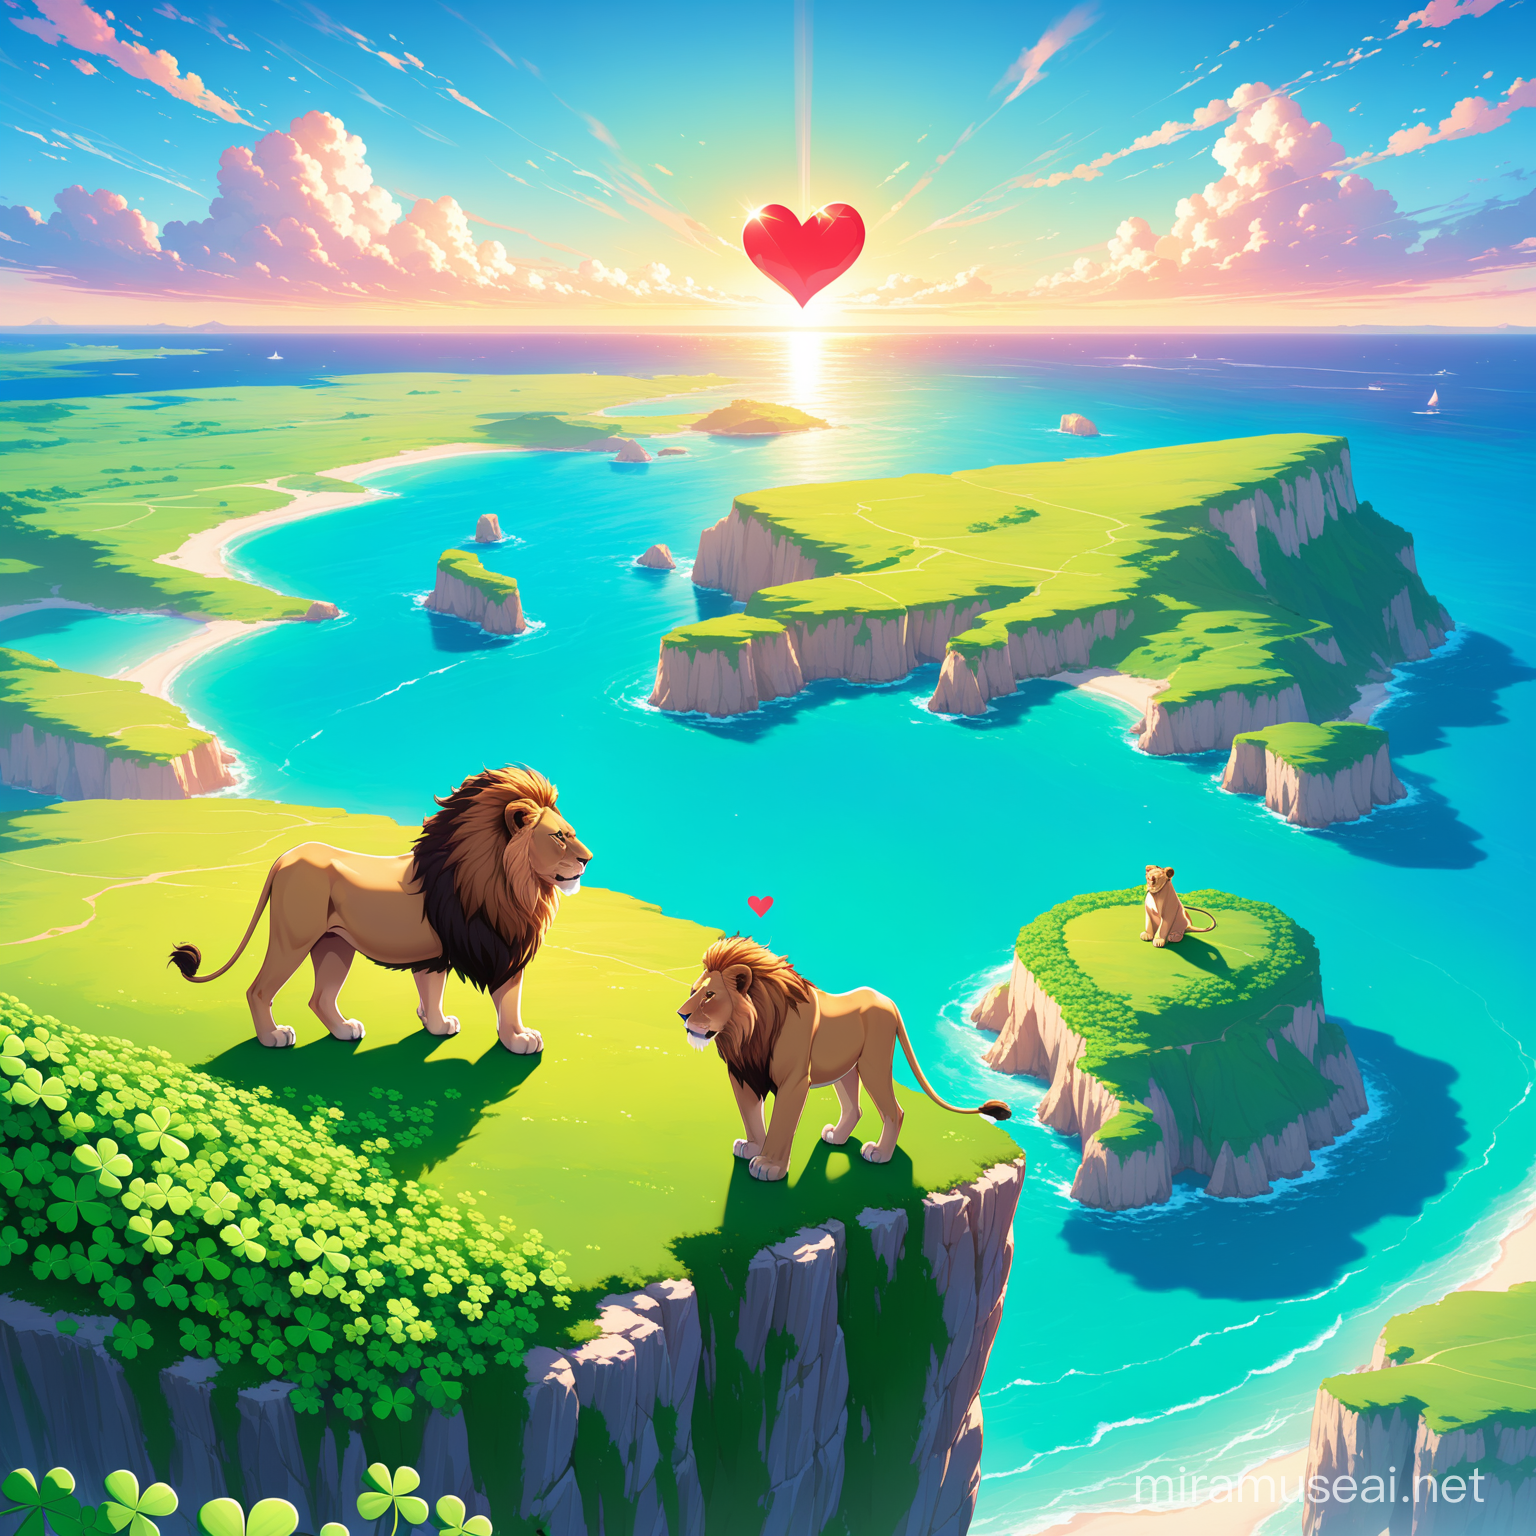 A multicolored lion and lioness on top of a cliff next to green clovers and turquoise water with a heart-shaped island